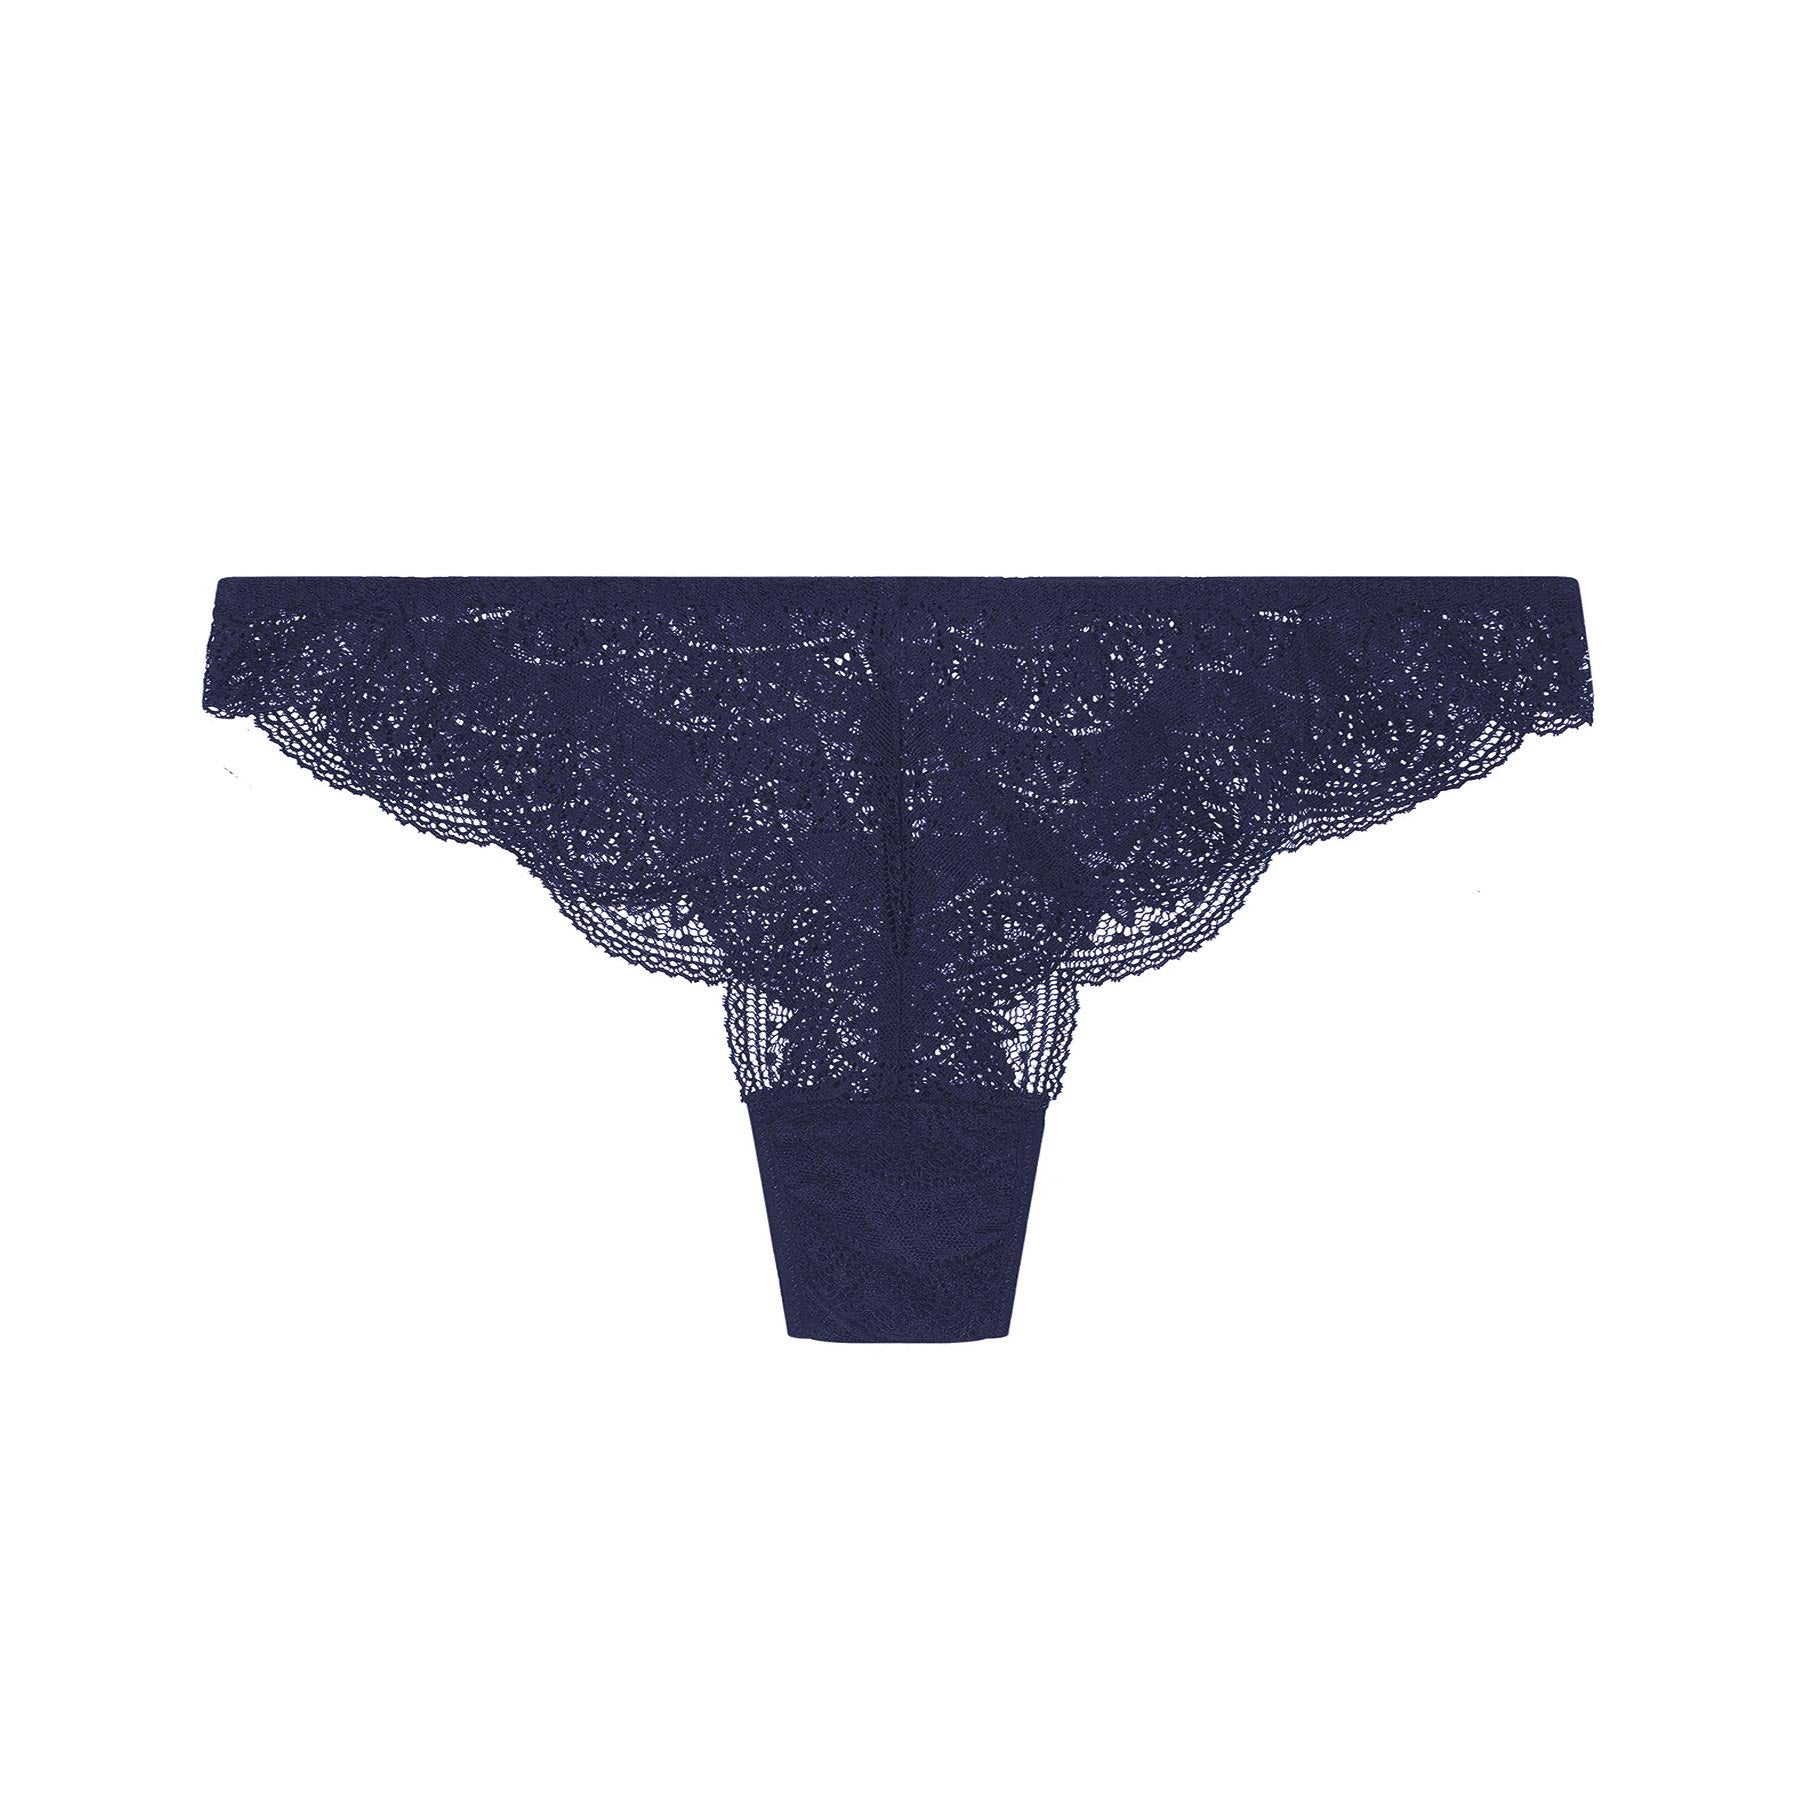  Barely There CustomFlex Fit Thong - Medium, Mono Floral :  Clothing, Shoes & Jewelry